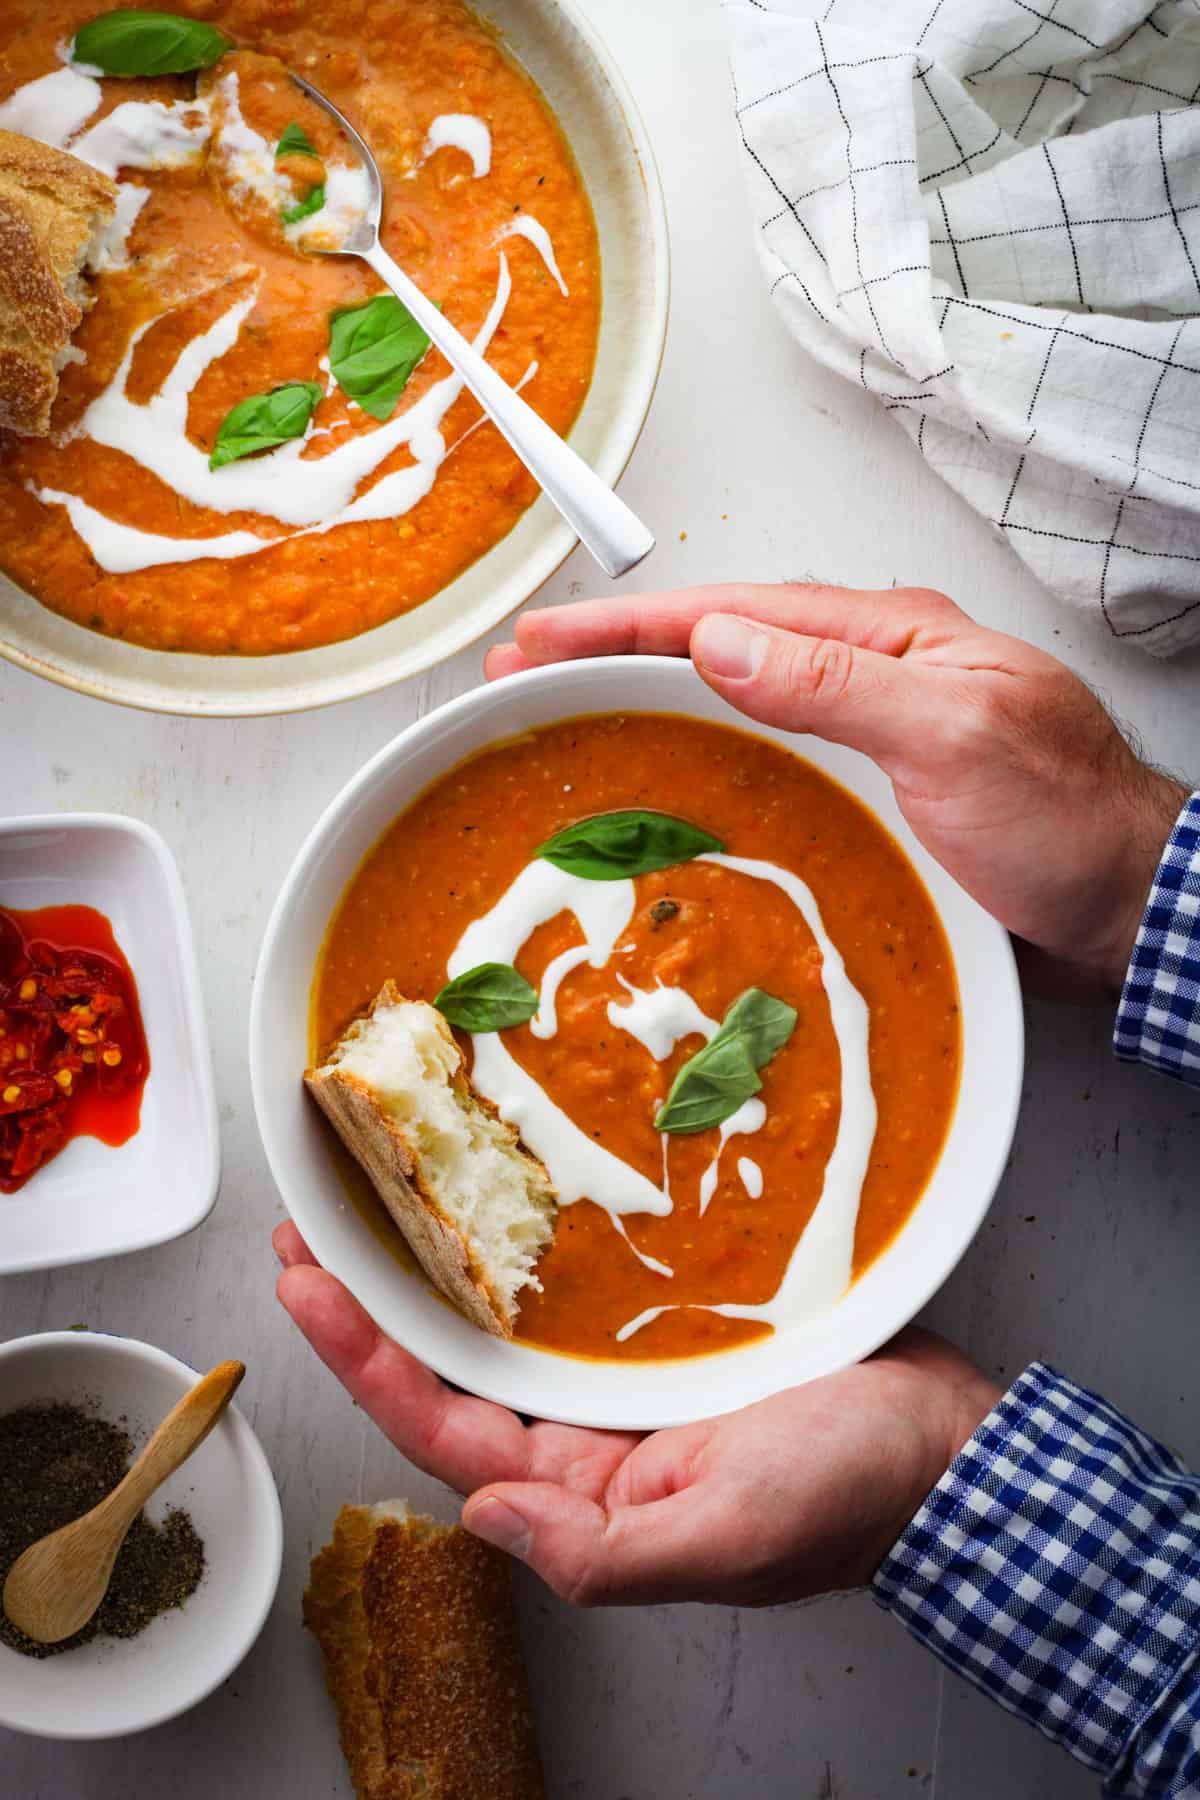 A bowl of lentil and red pepper soup held by two hands with another bowl of soup off center. The soup is topped with yogurt, basil and bread.